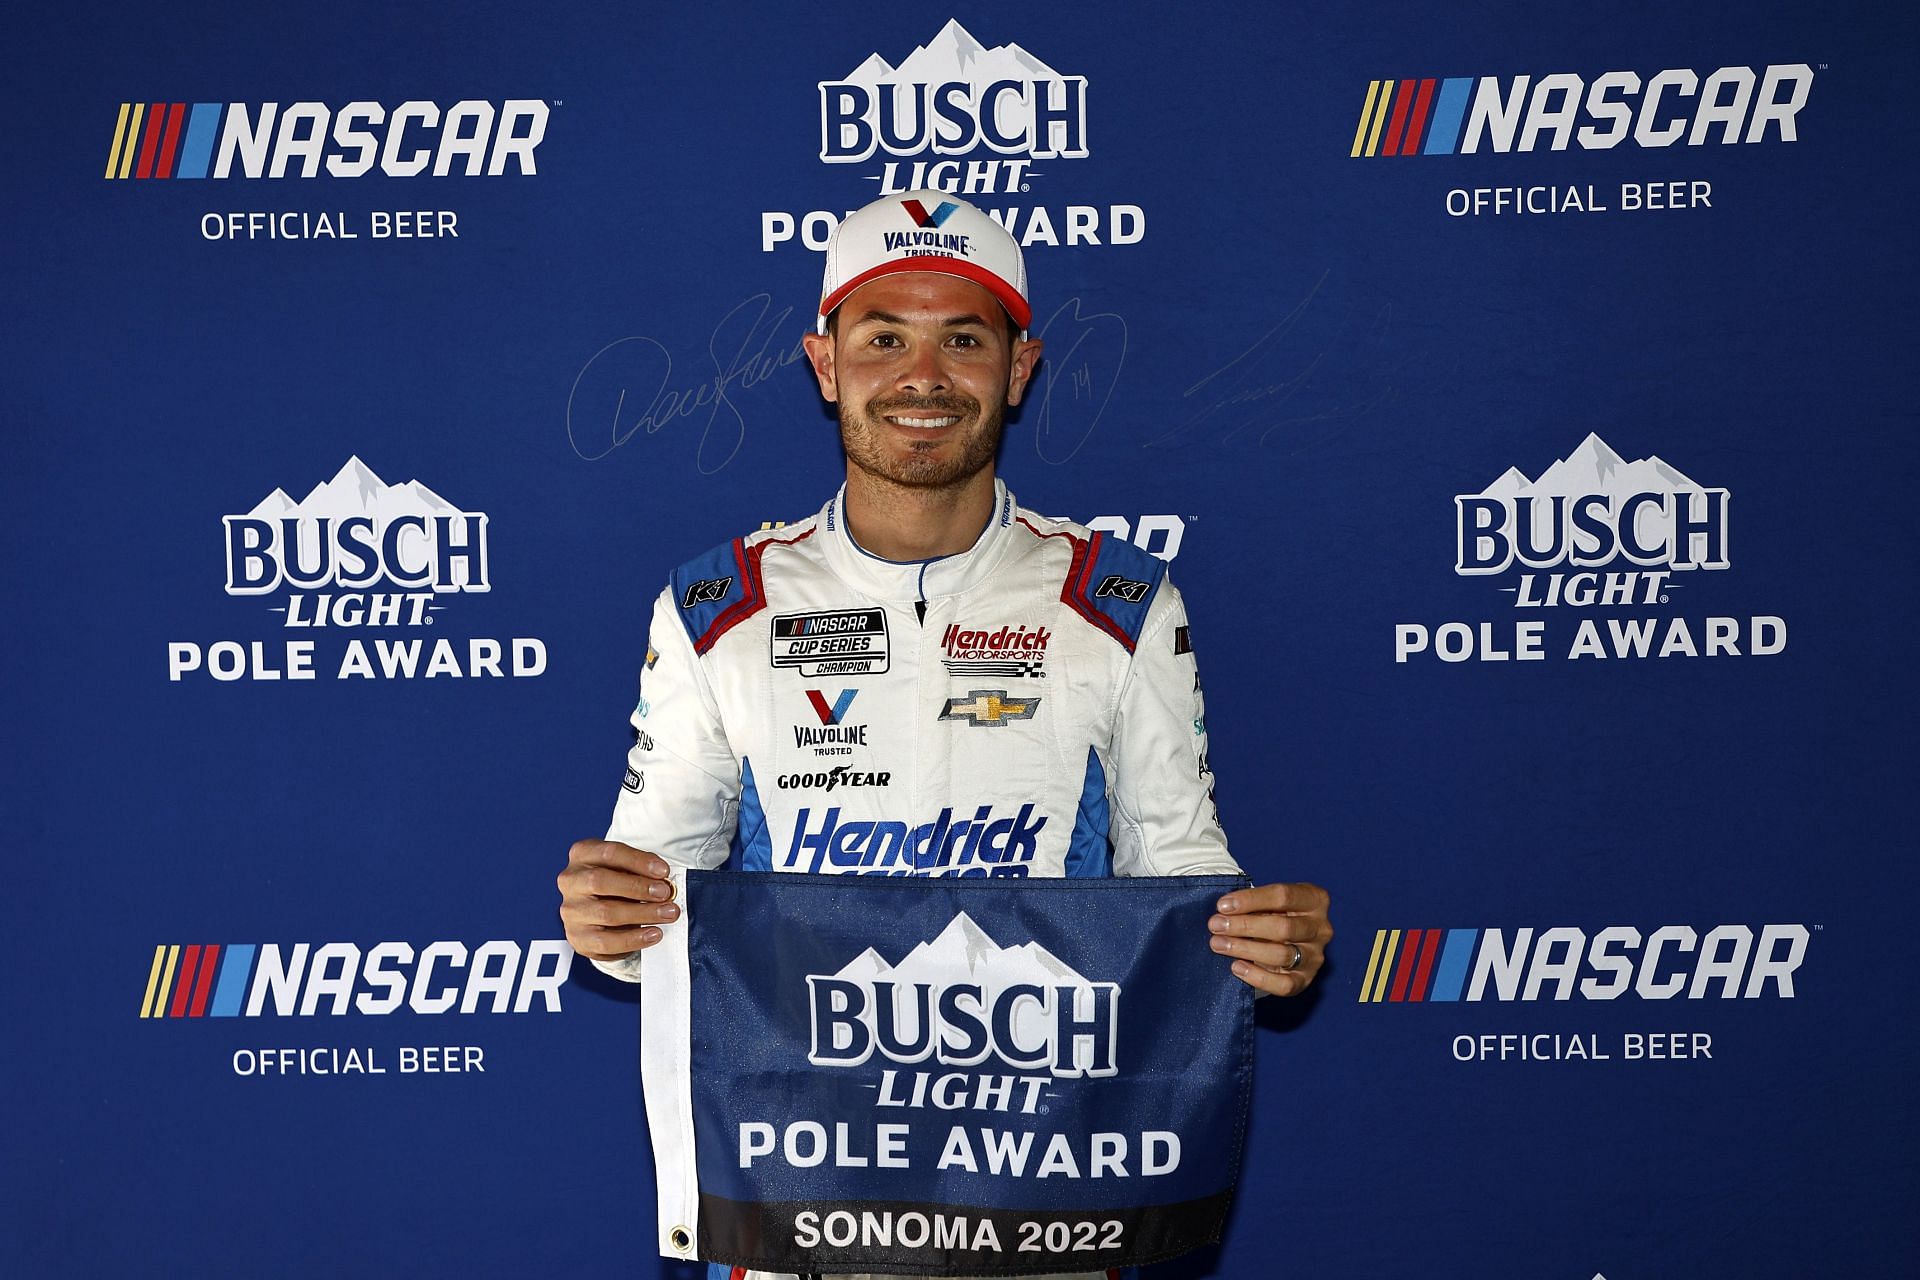 Kyle Larson poses for photos after winning the pole award during qualifying for the NASCAR Cup Series Toyota/Save Mart 350 at Sonoma Raceway